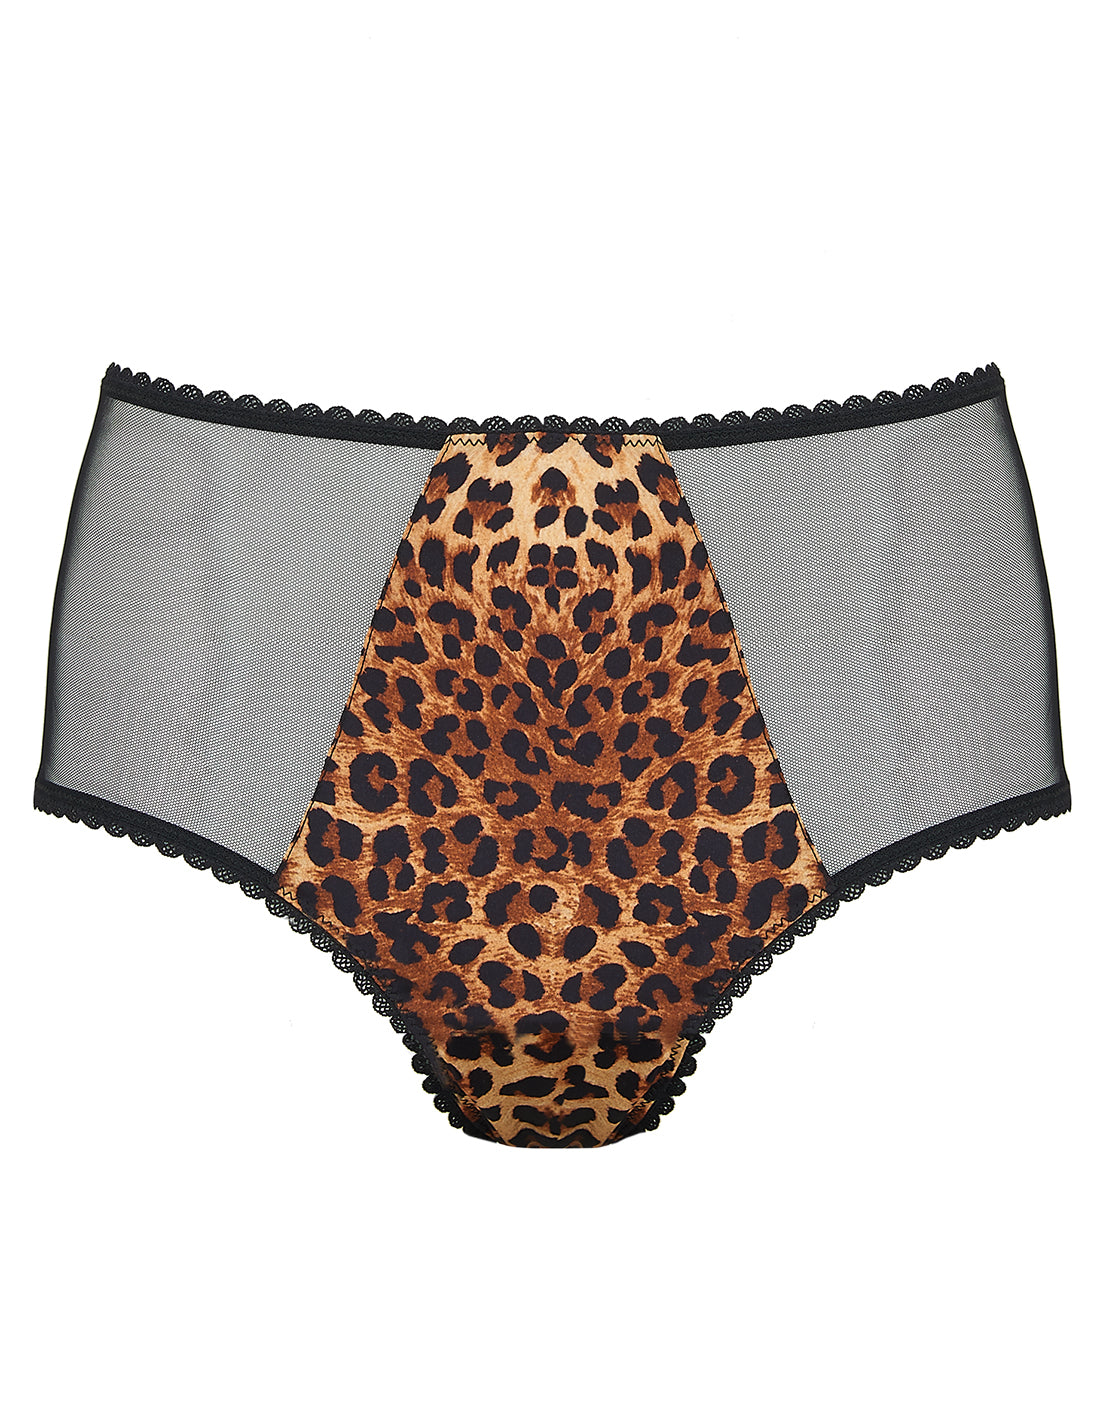  Colorful Lion Head Women's High Waisted Underwear